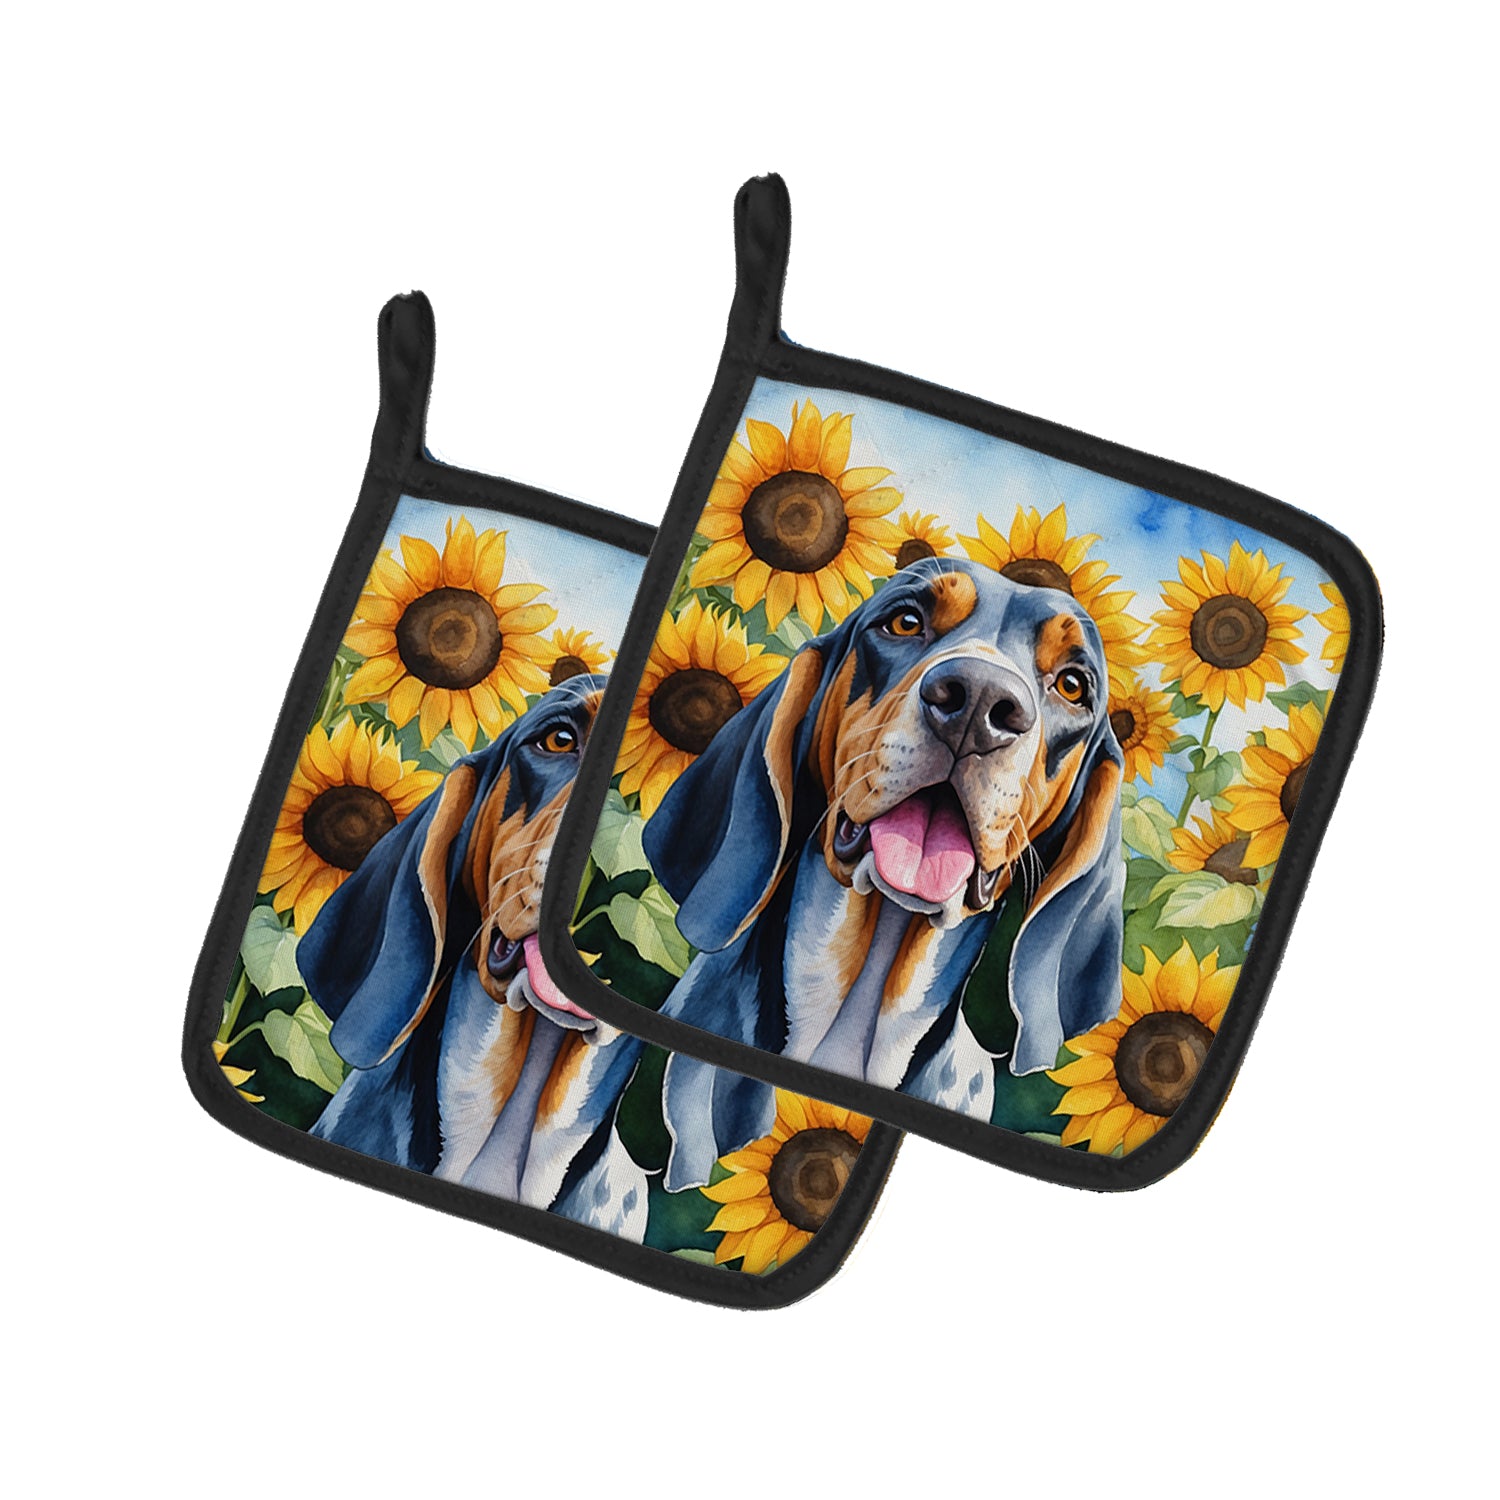 Buy this American English Coonhound in Sunflowers Pair of Pot Holders